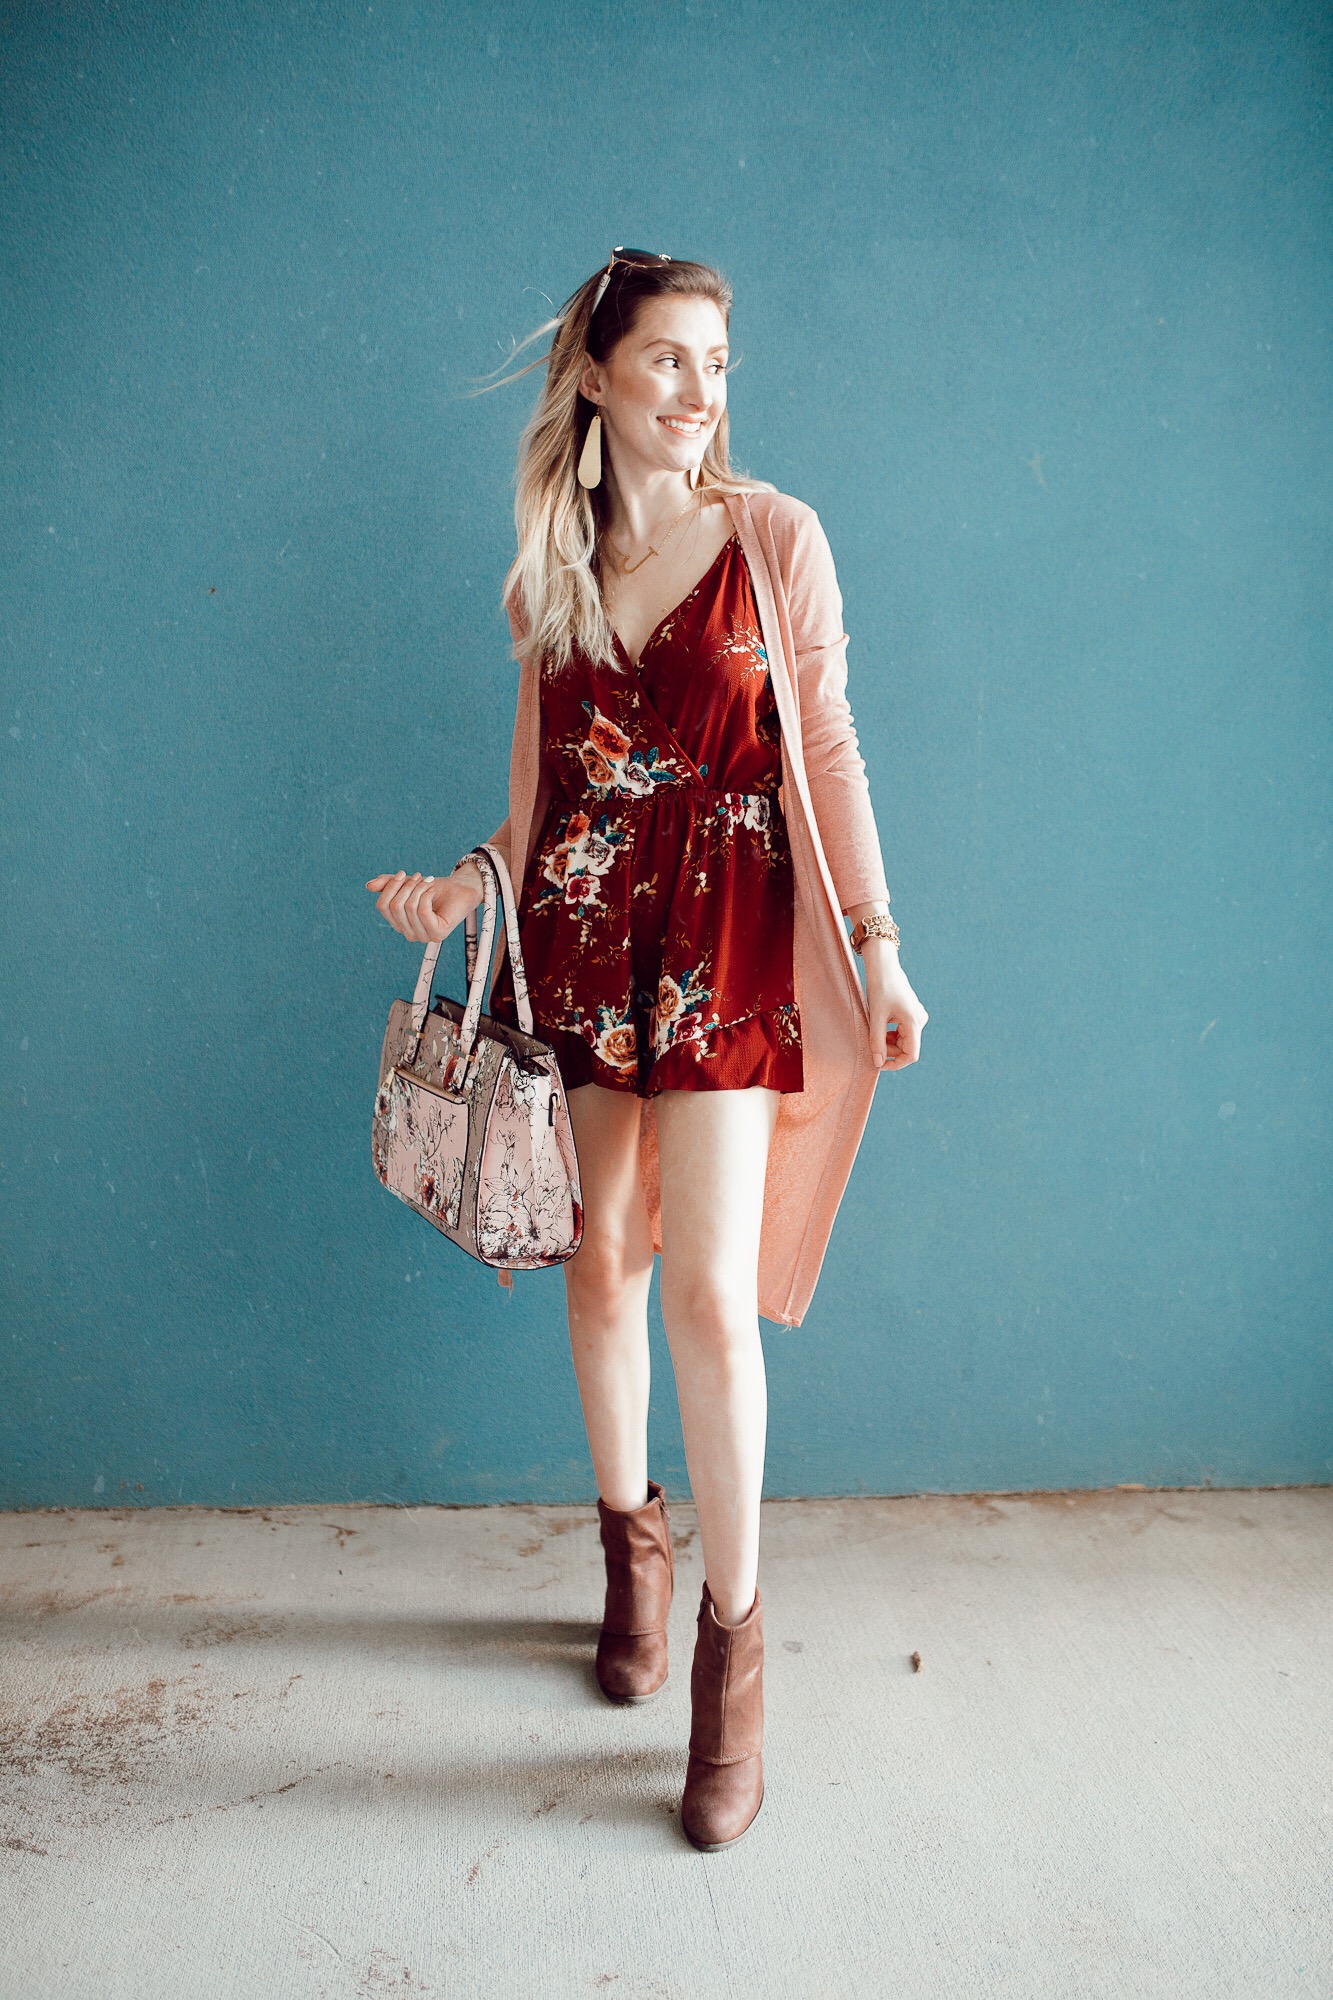 Summer to fall transition outfit by popular North Carolina fashion blogger Jessica Linn. Burgundy floral print romper from Copper Bloom, pink duster cardigan from Romwe, boots from Fergalicious by Fergie.